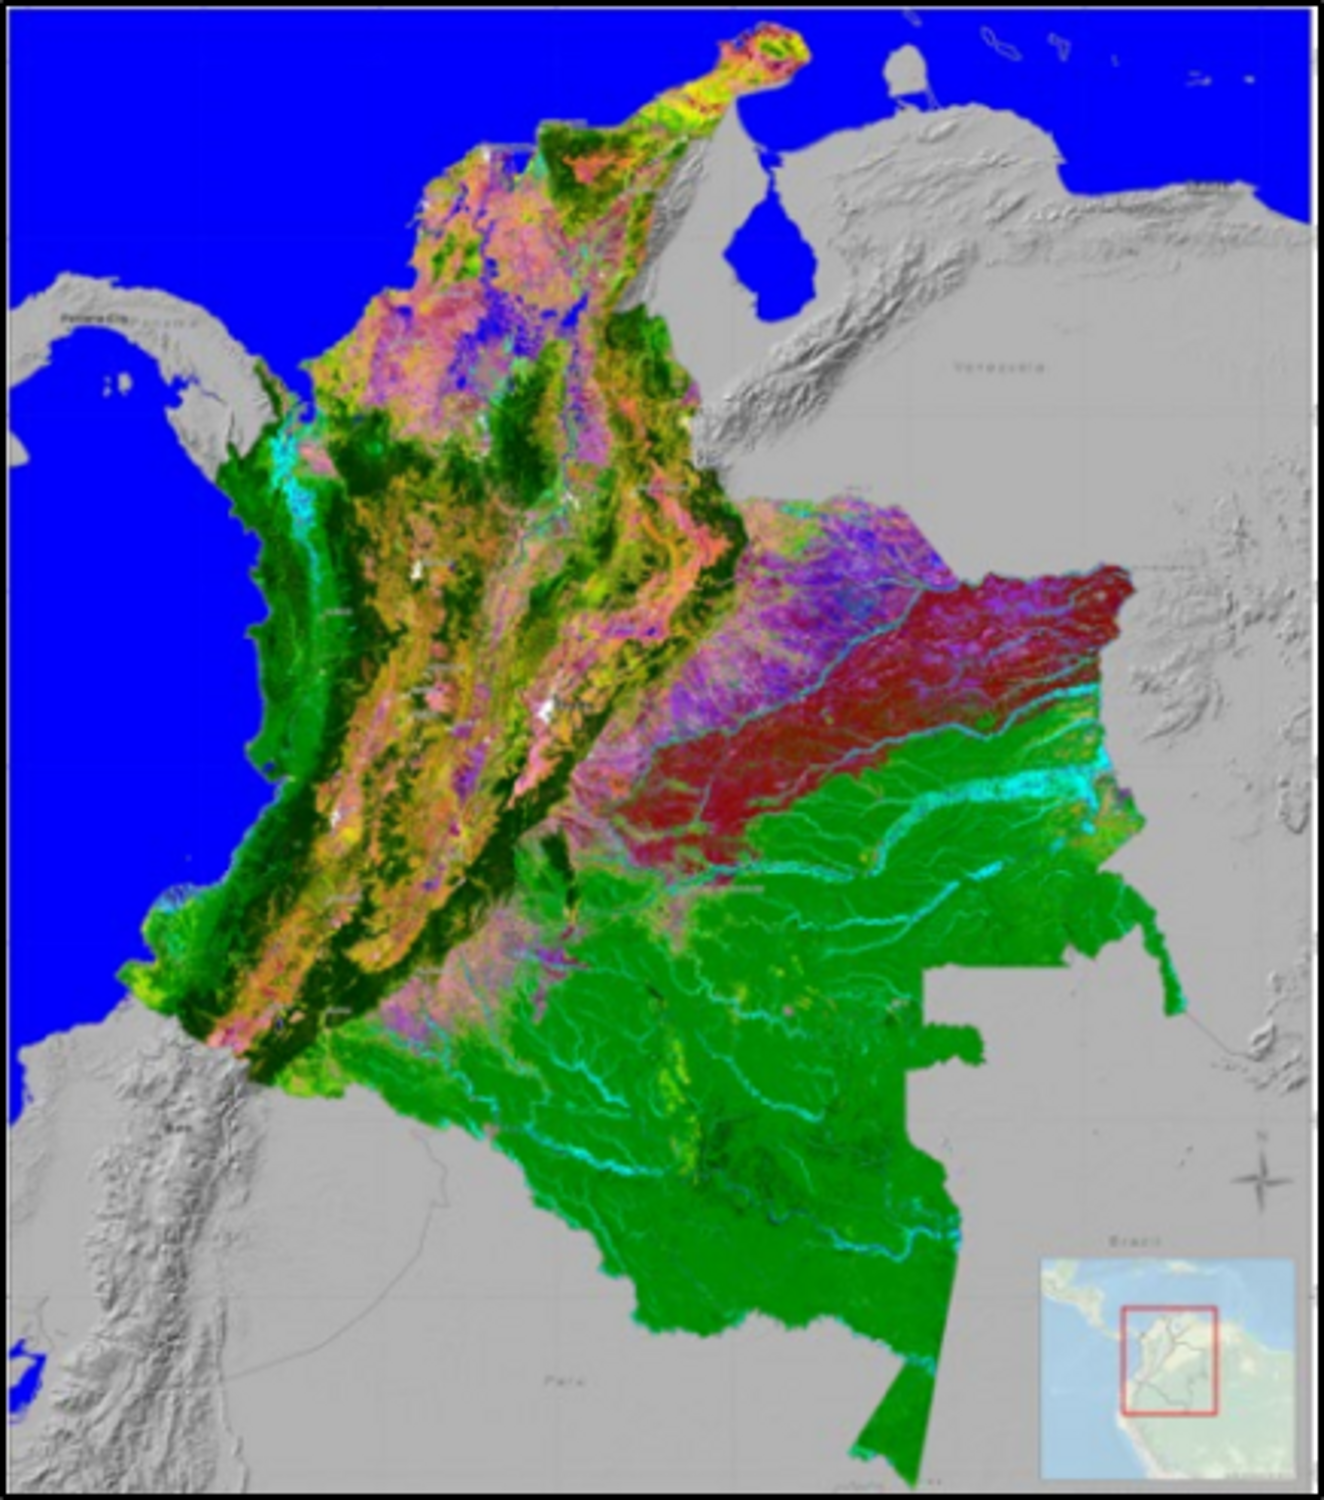 Baseline map: Land cover map of Colombia
